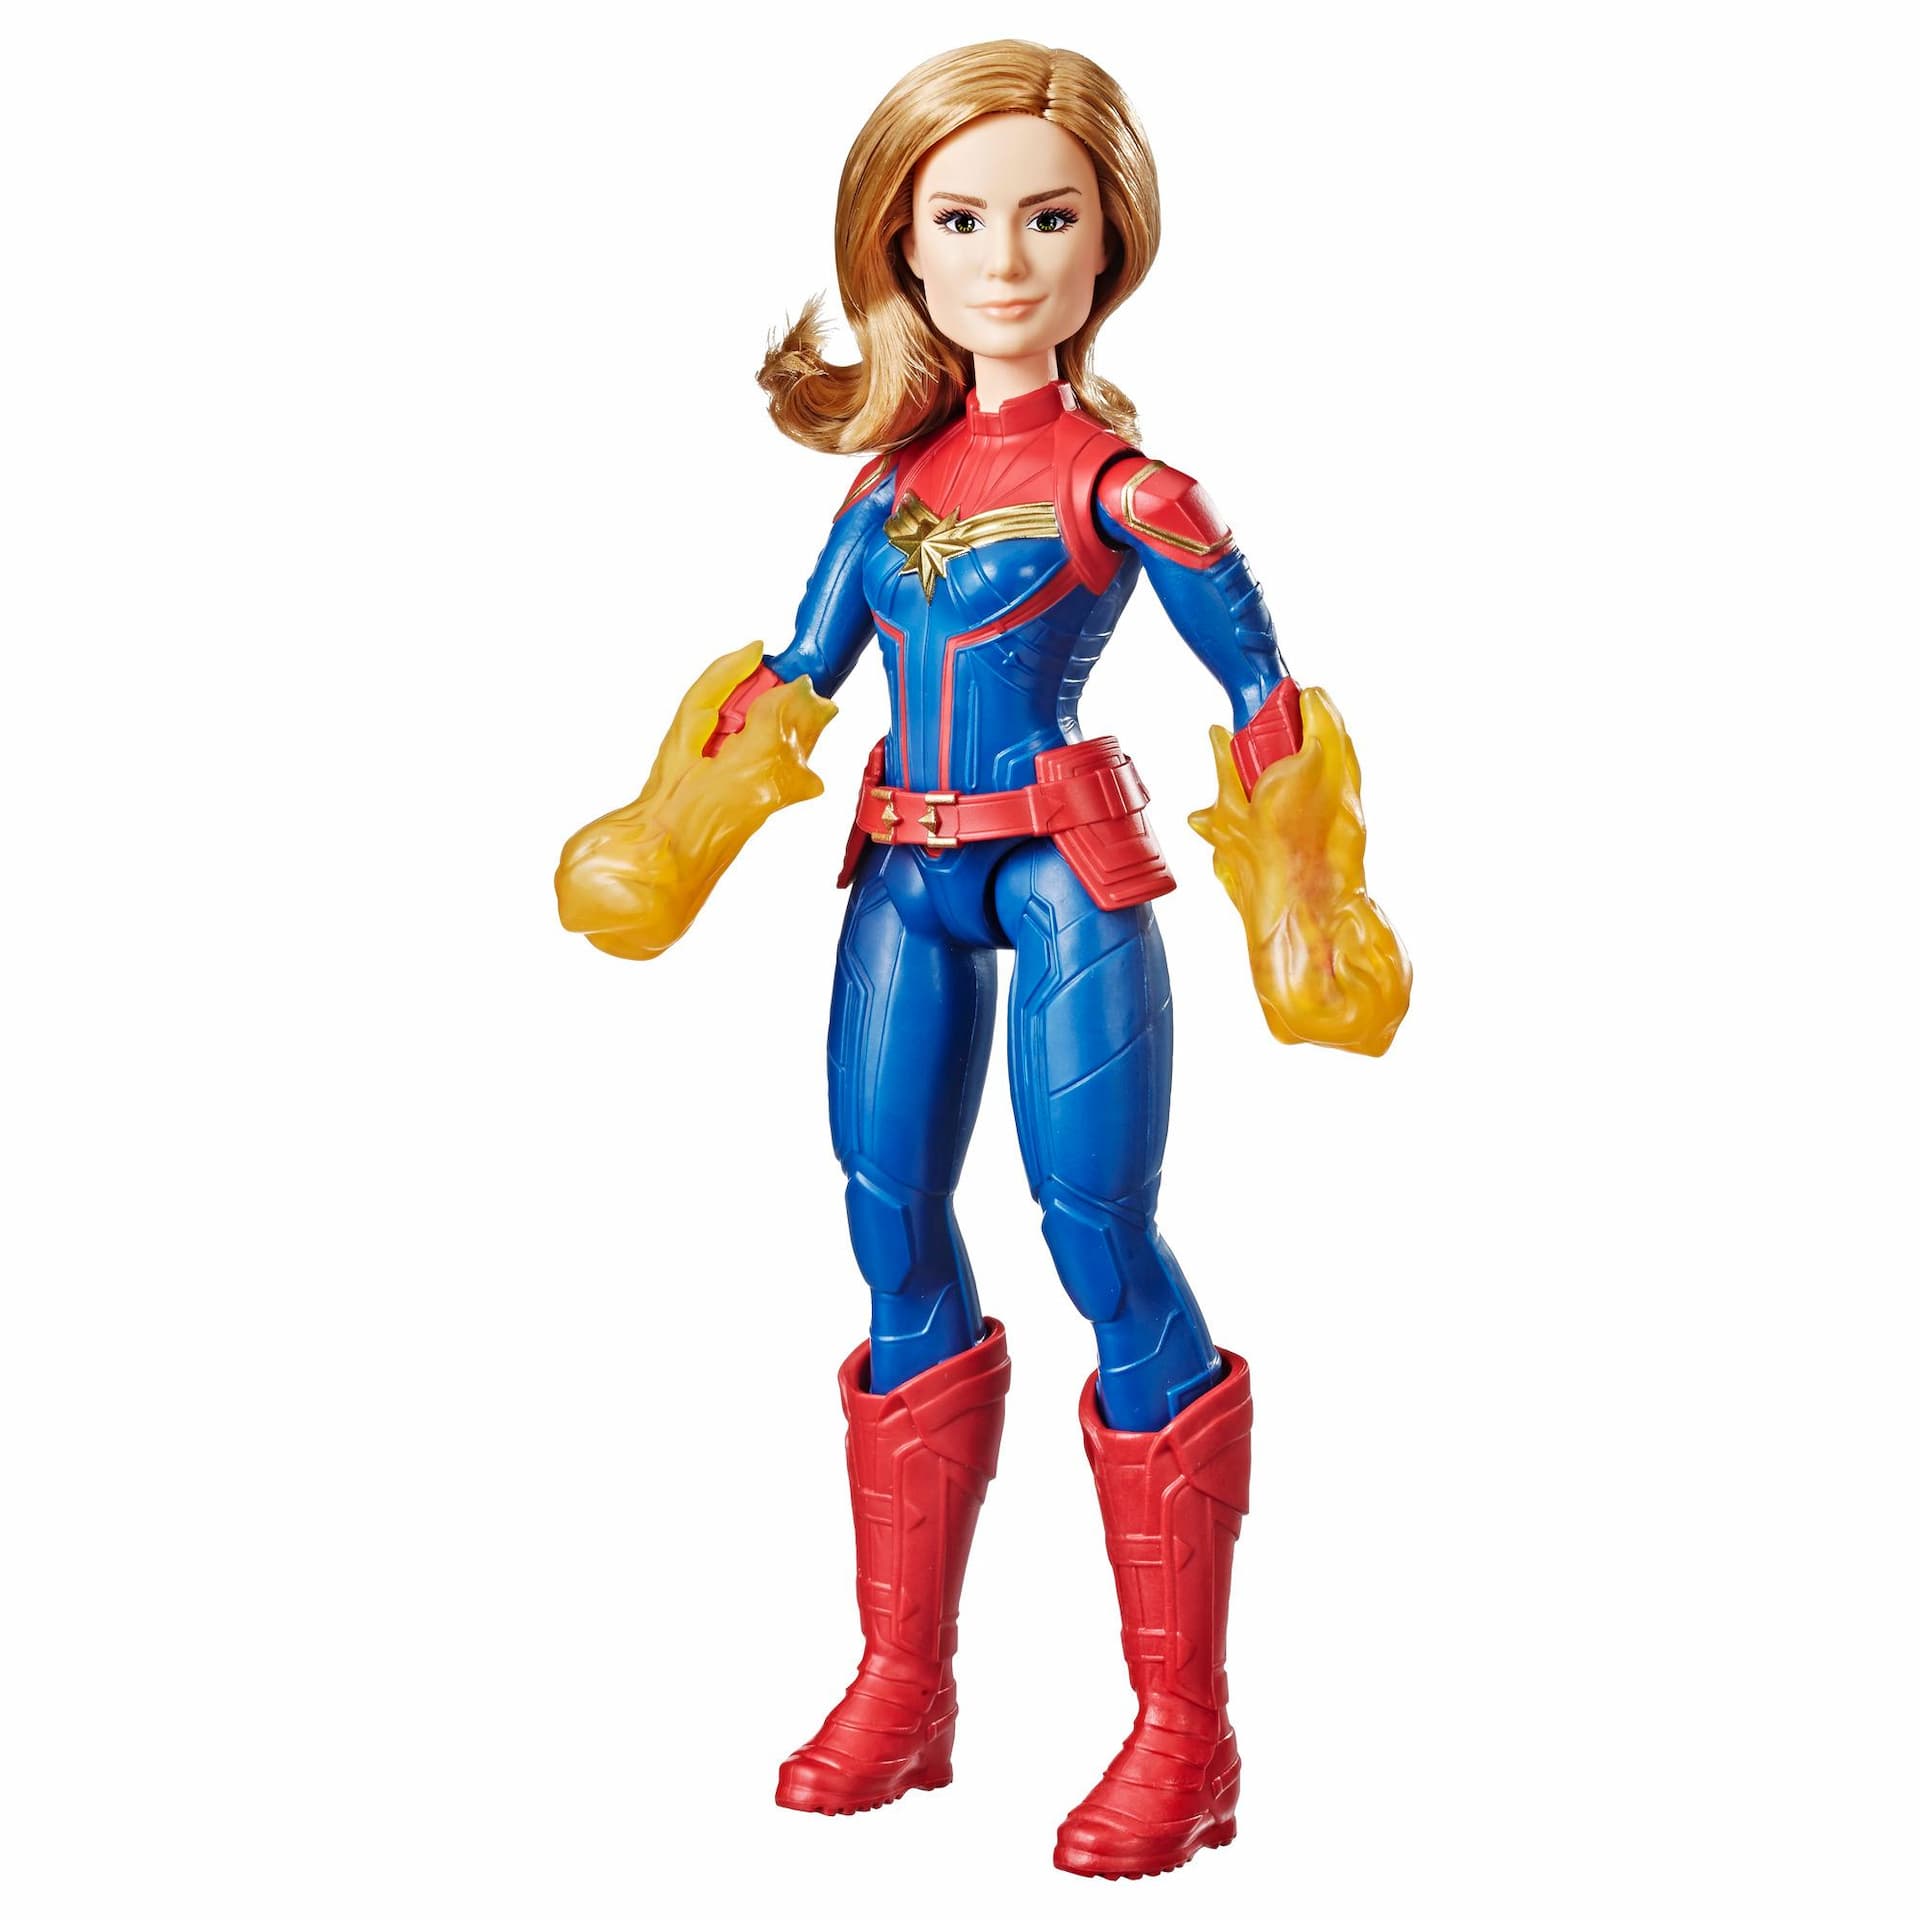 Marvel Captain Marvel Movie Cosmic Captain Marvel Super Hero Doll from Captain Marvel Movie (Ages 6 and up)